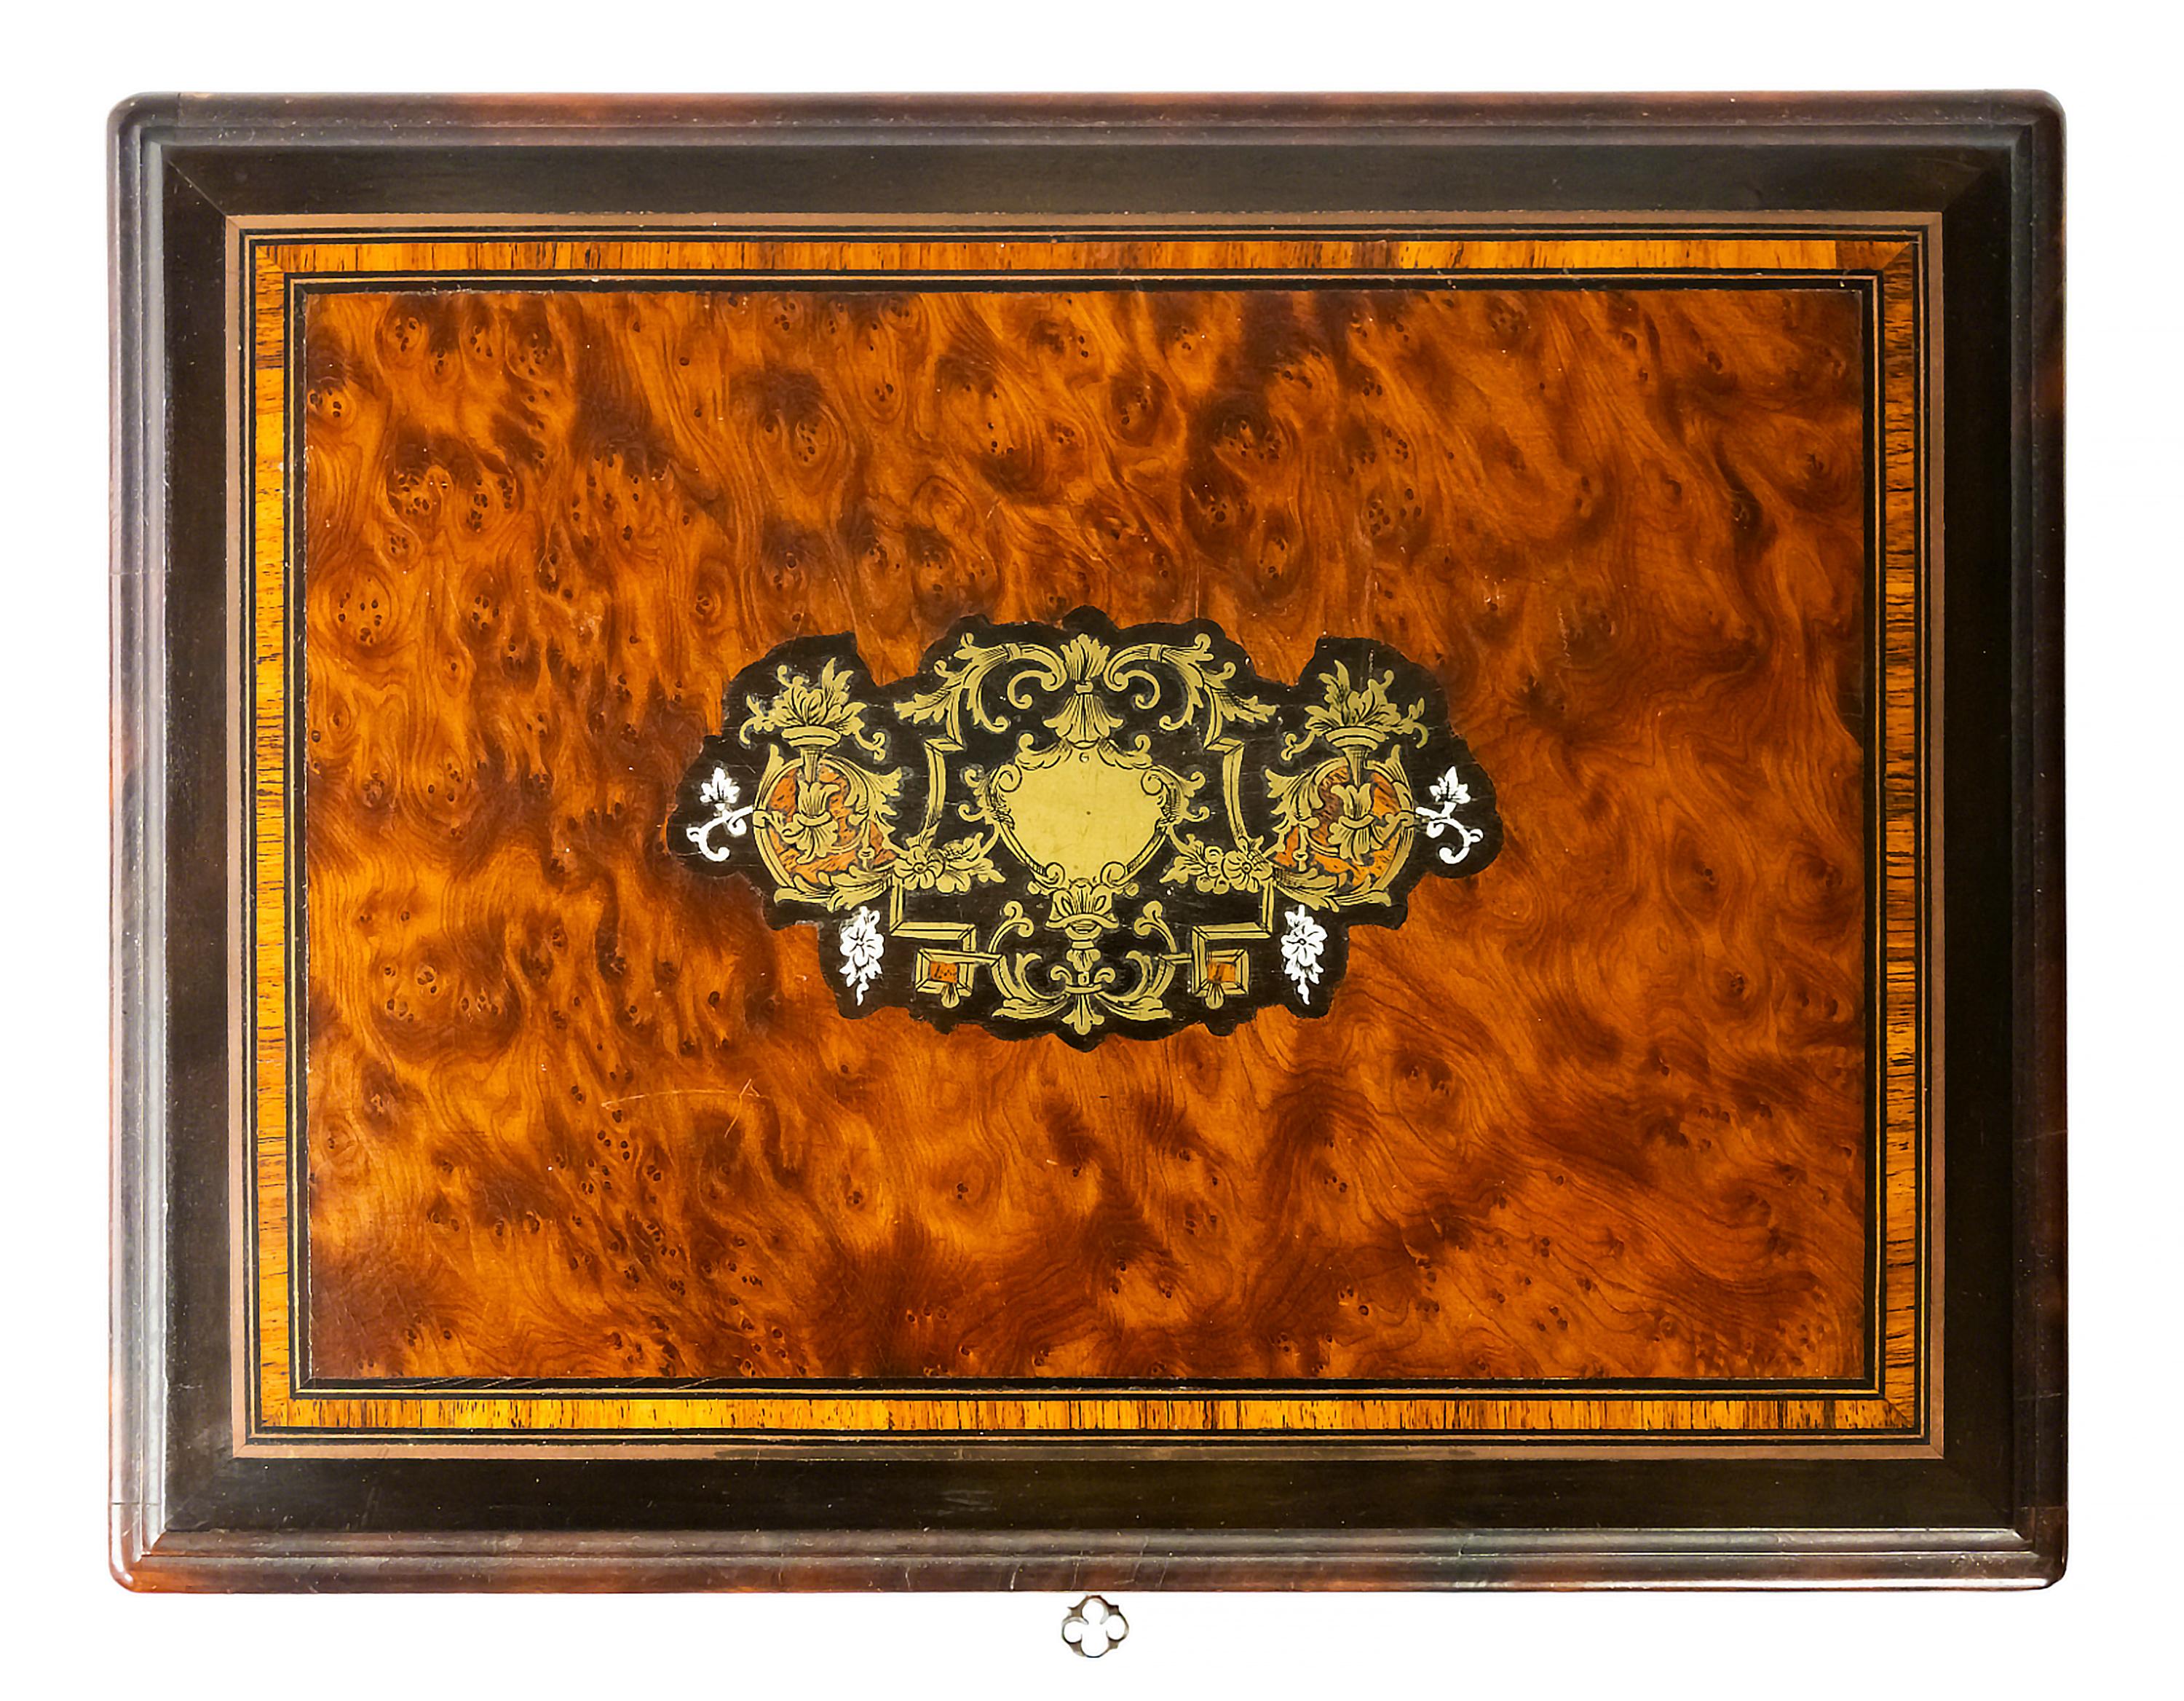 Antique French Boulle marquetry box with cards and game elements inside.
The wooden box is decorated with inlaid brass.
Original key is included.
  